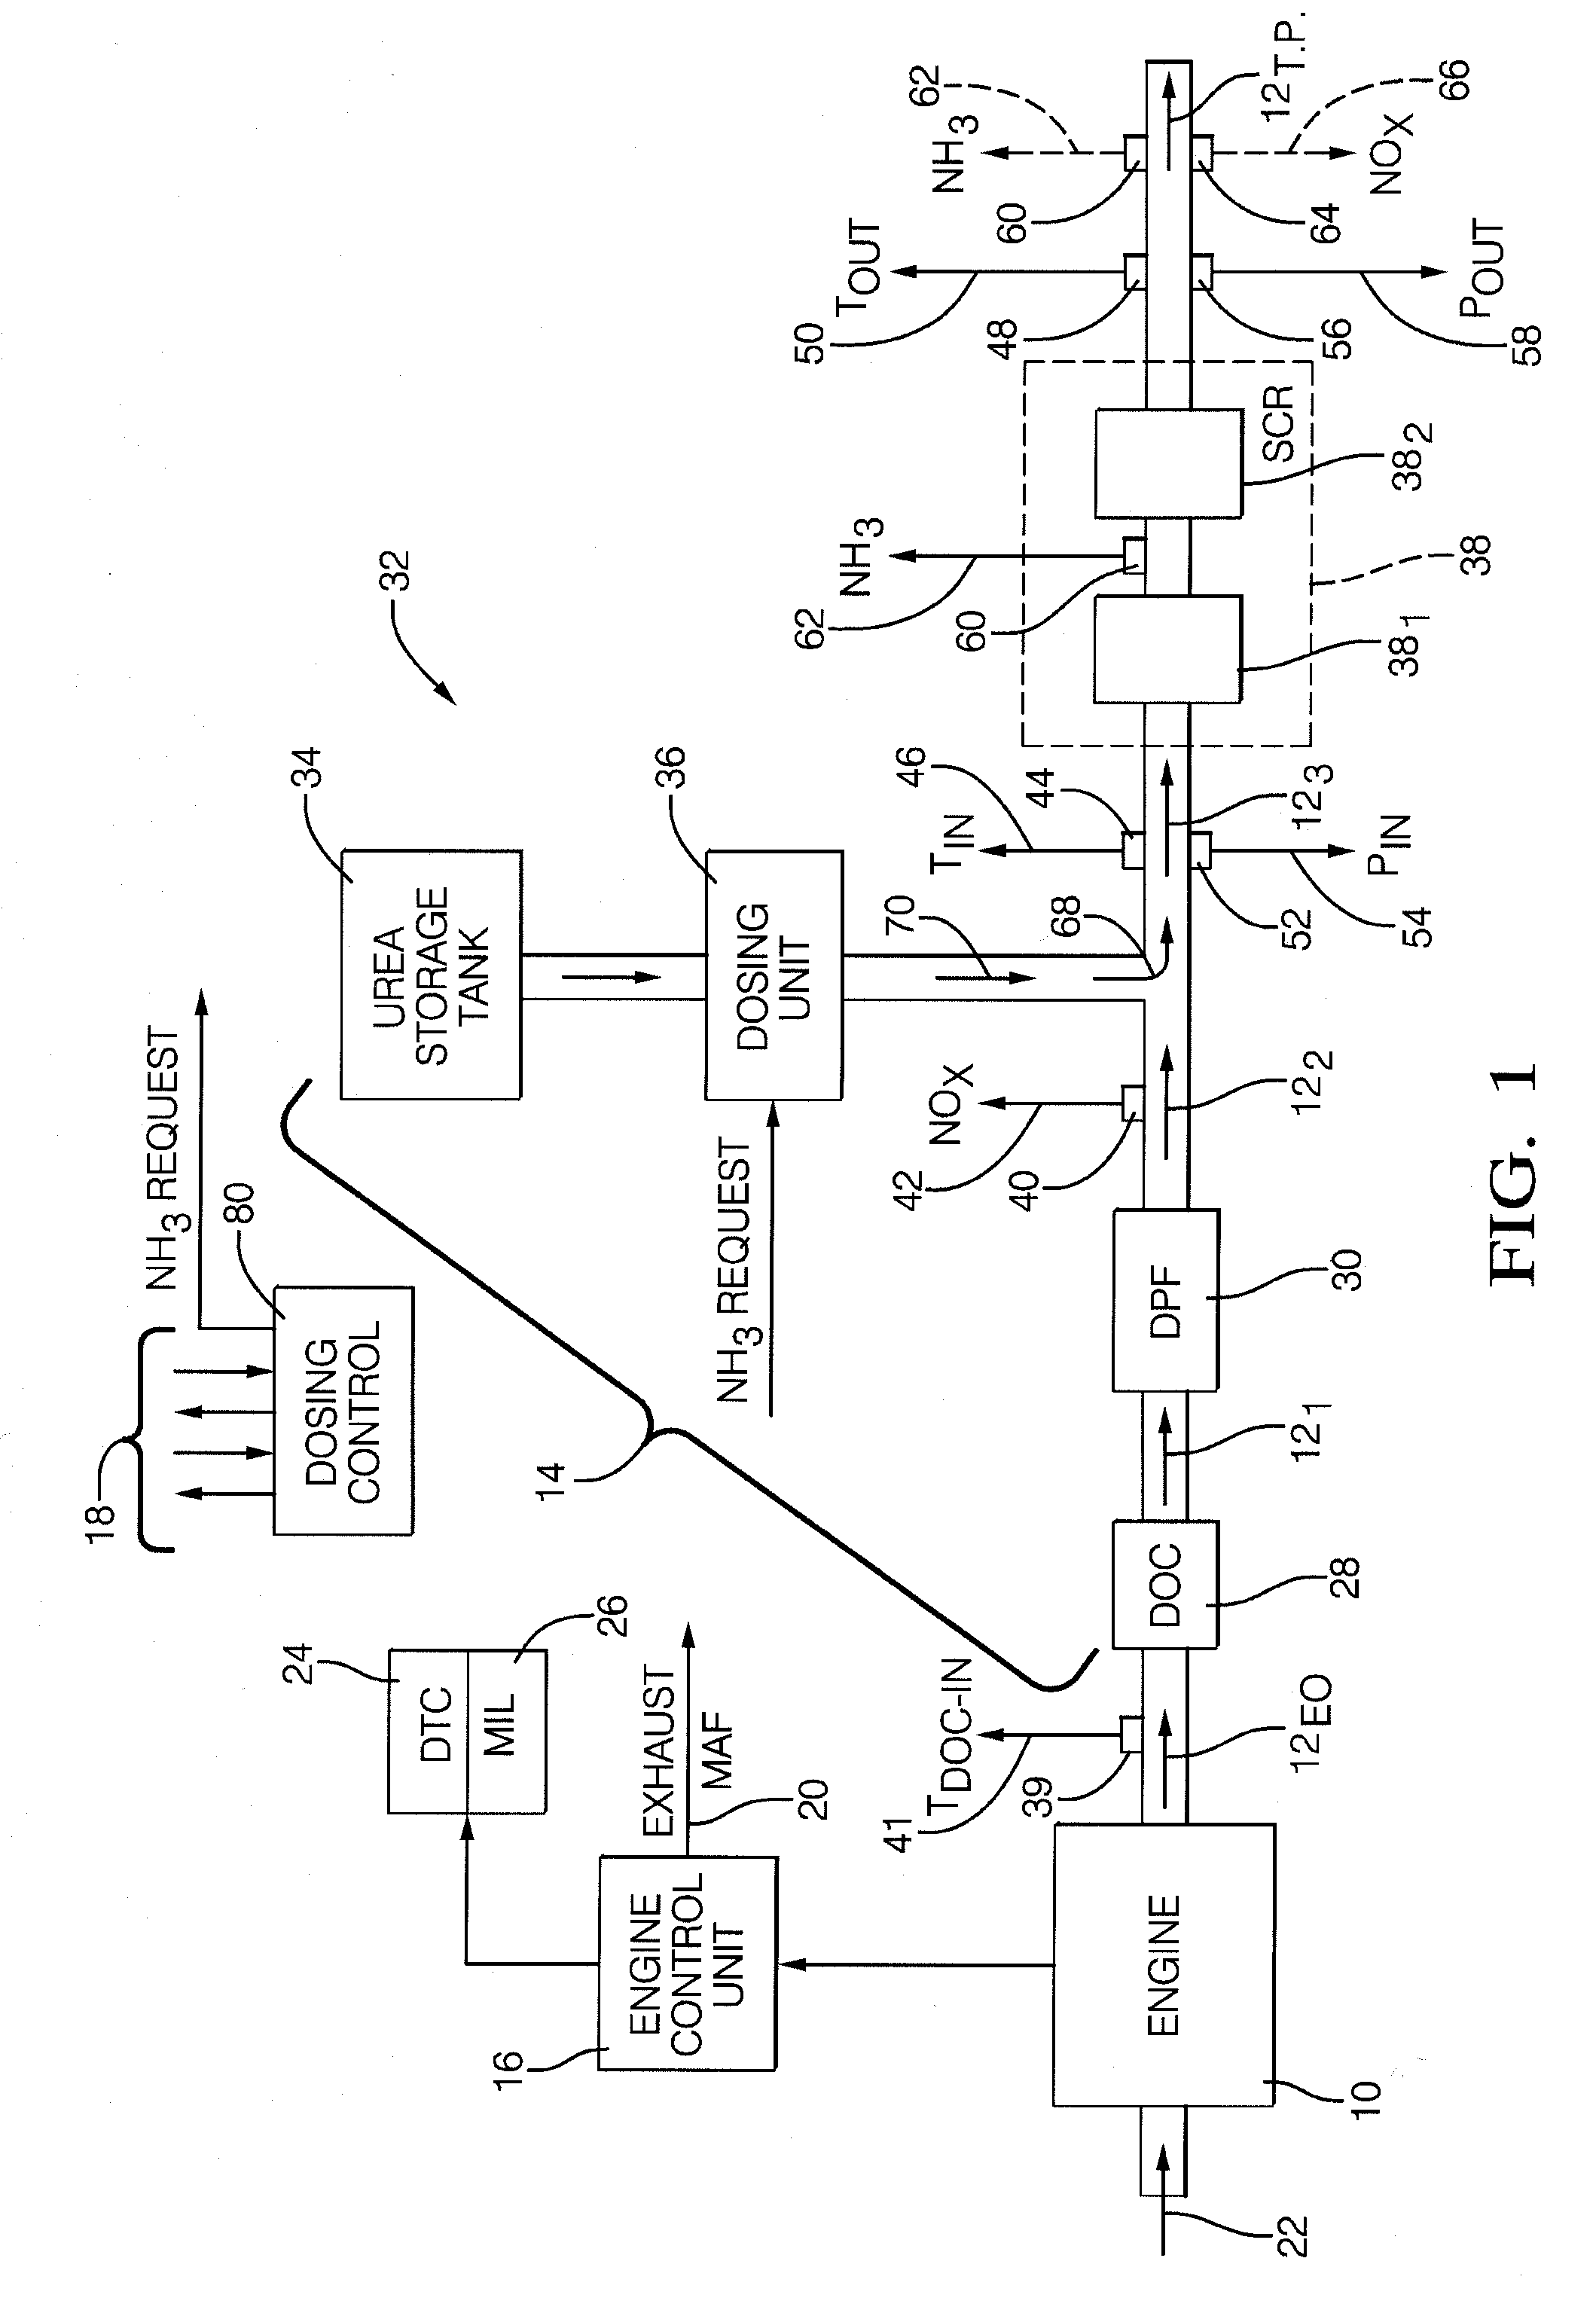 Diagnostic methods for selective catalytic reduction (SCR) exhaust treatment system